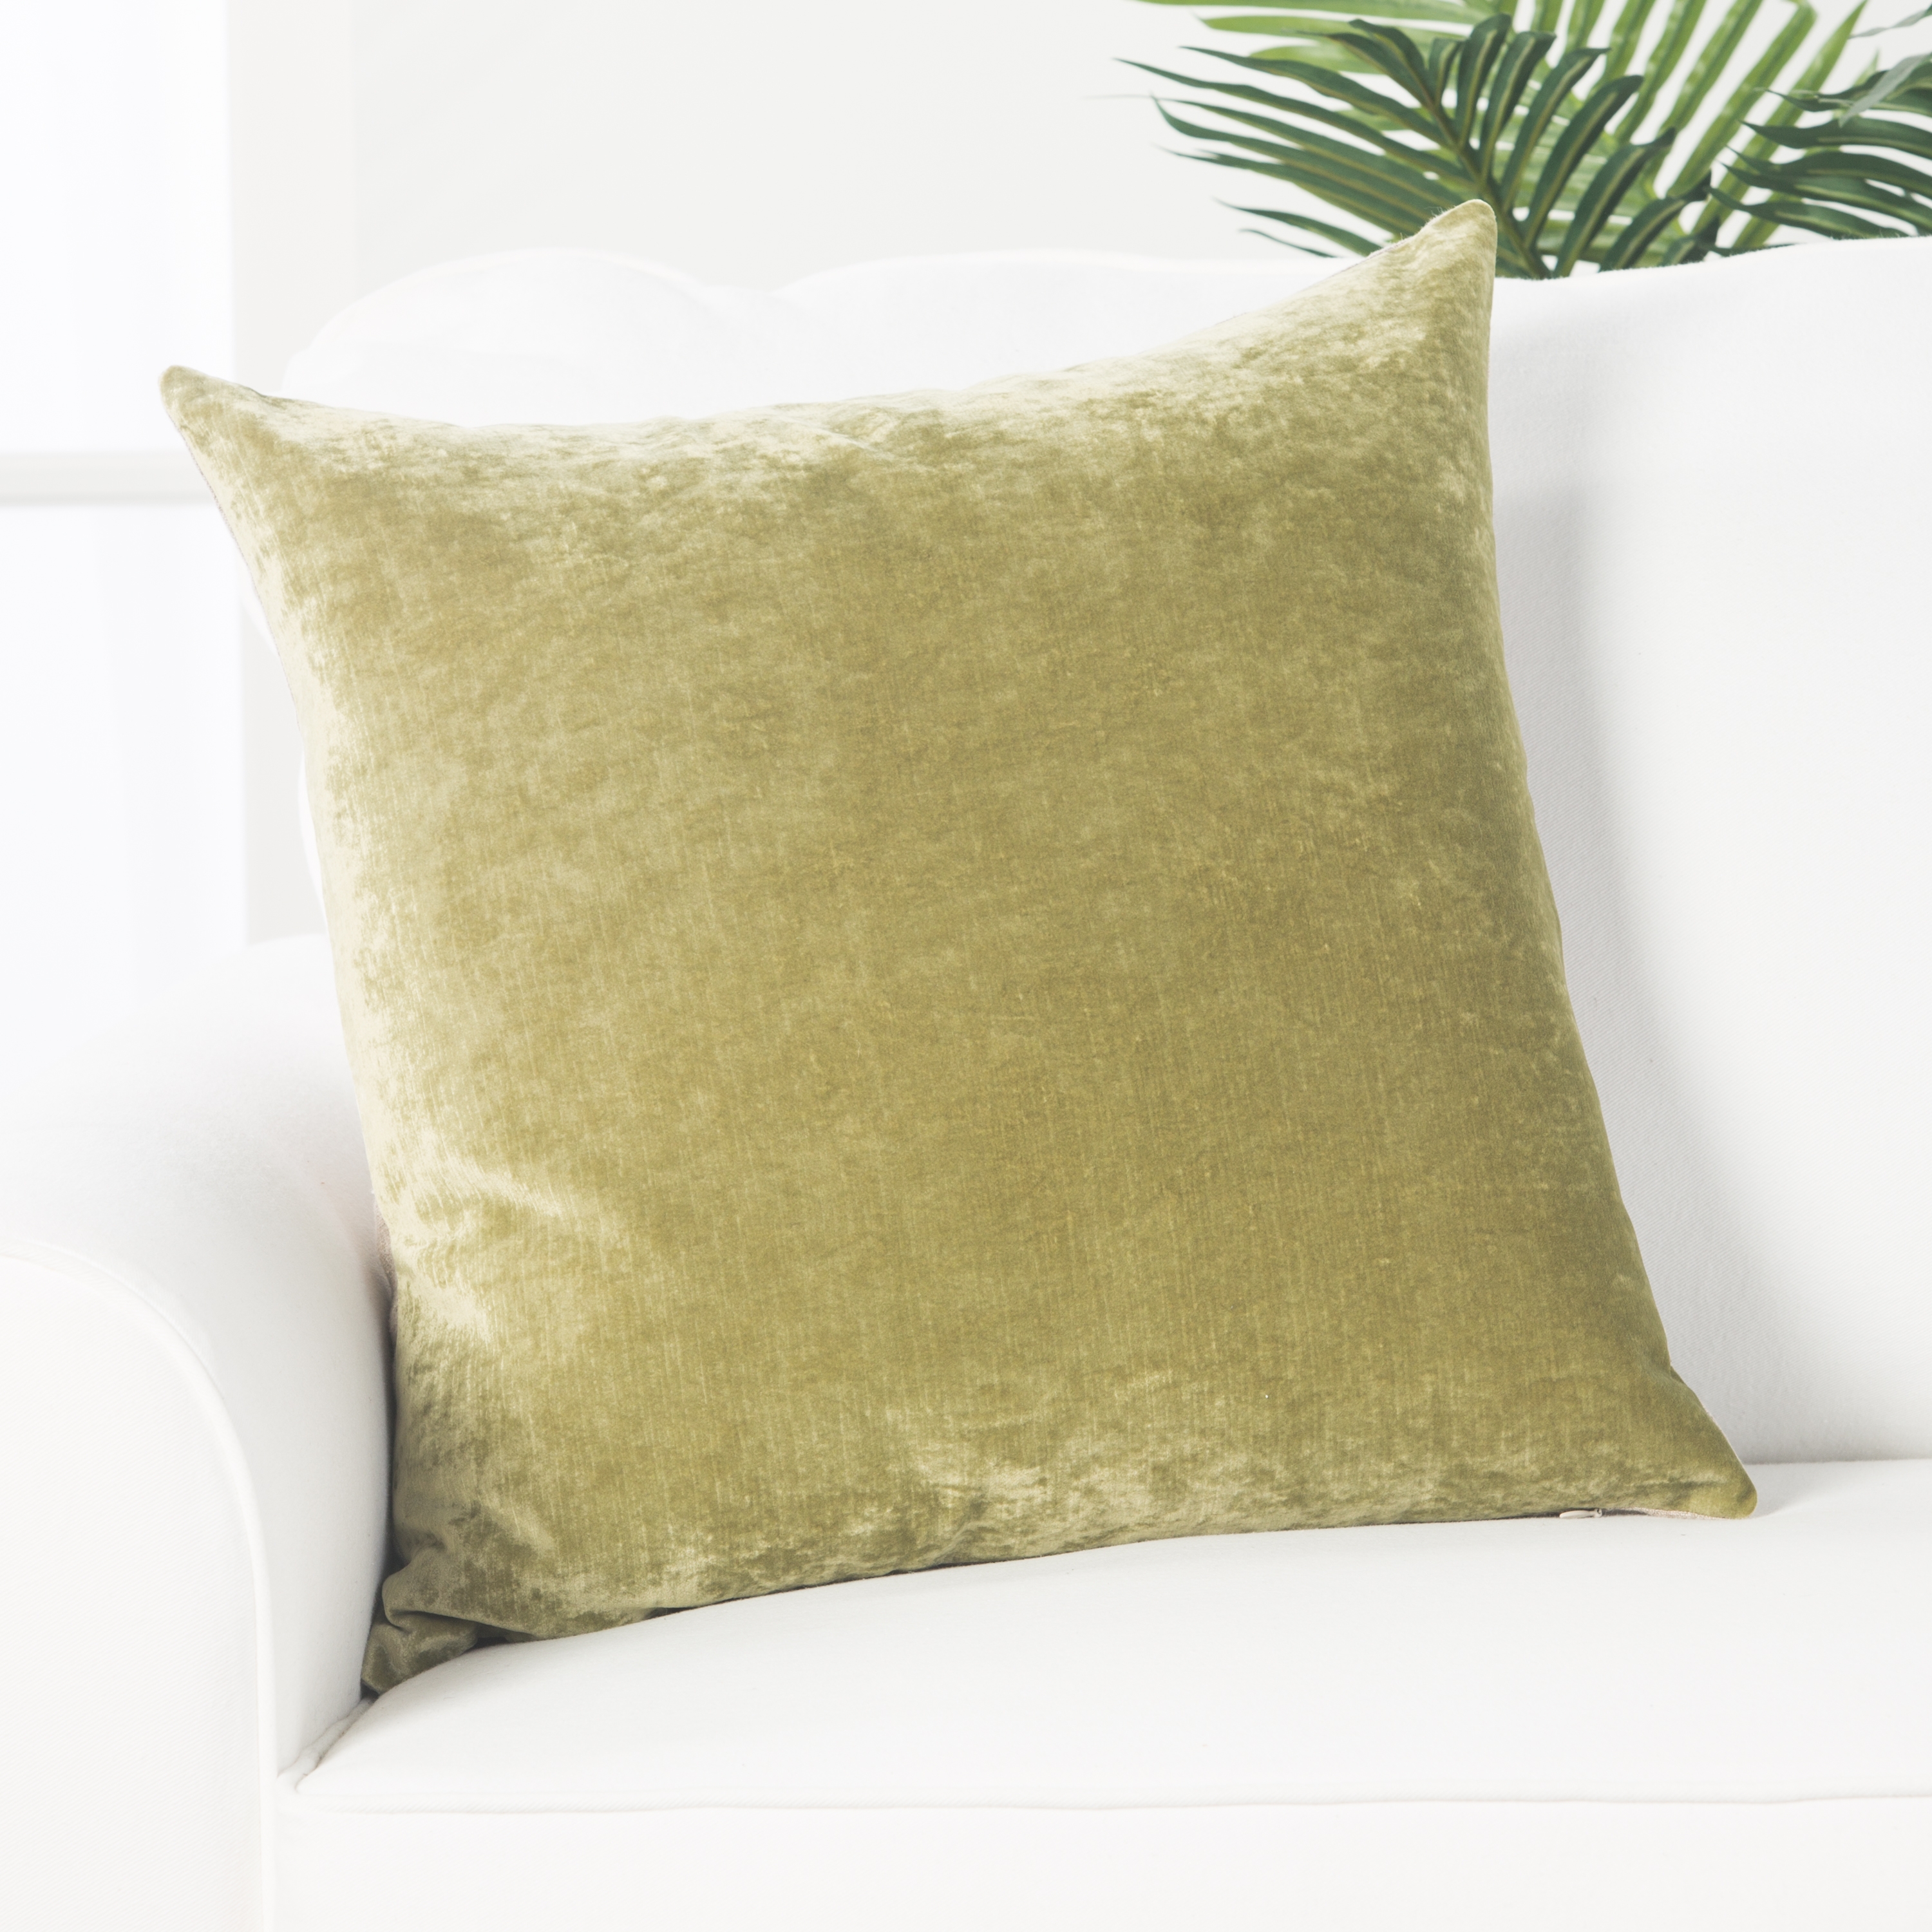 Arielle Pillow, 20"x 20", Olive - Image 1